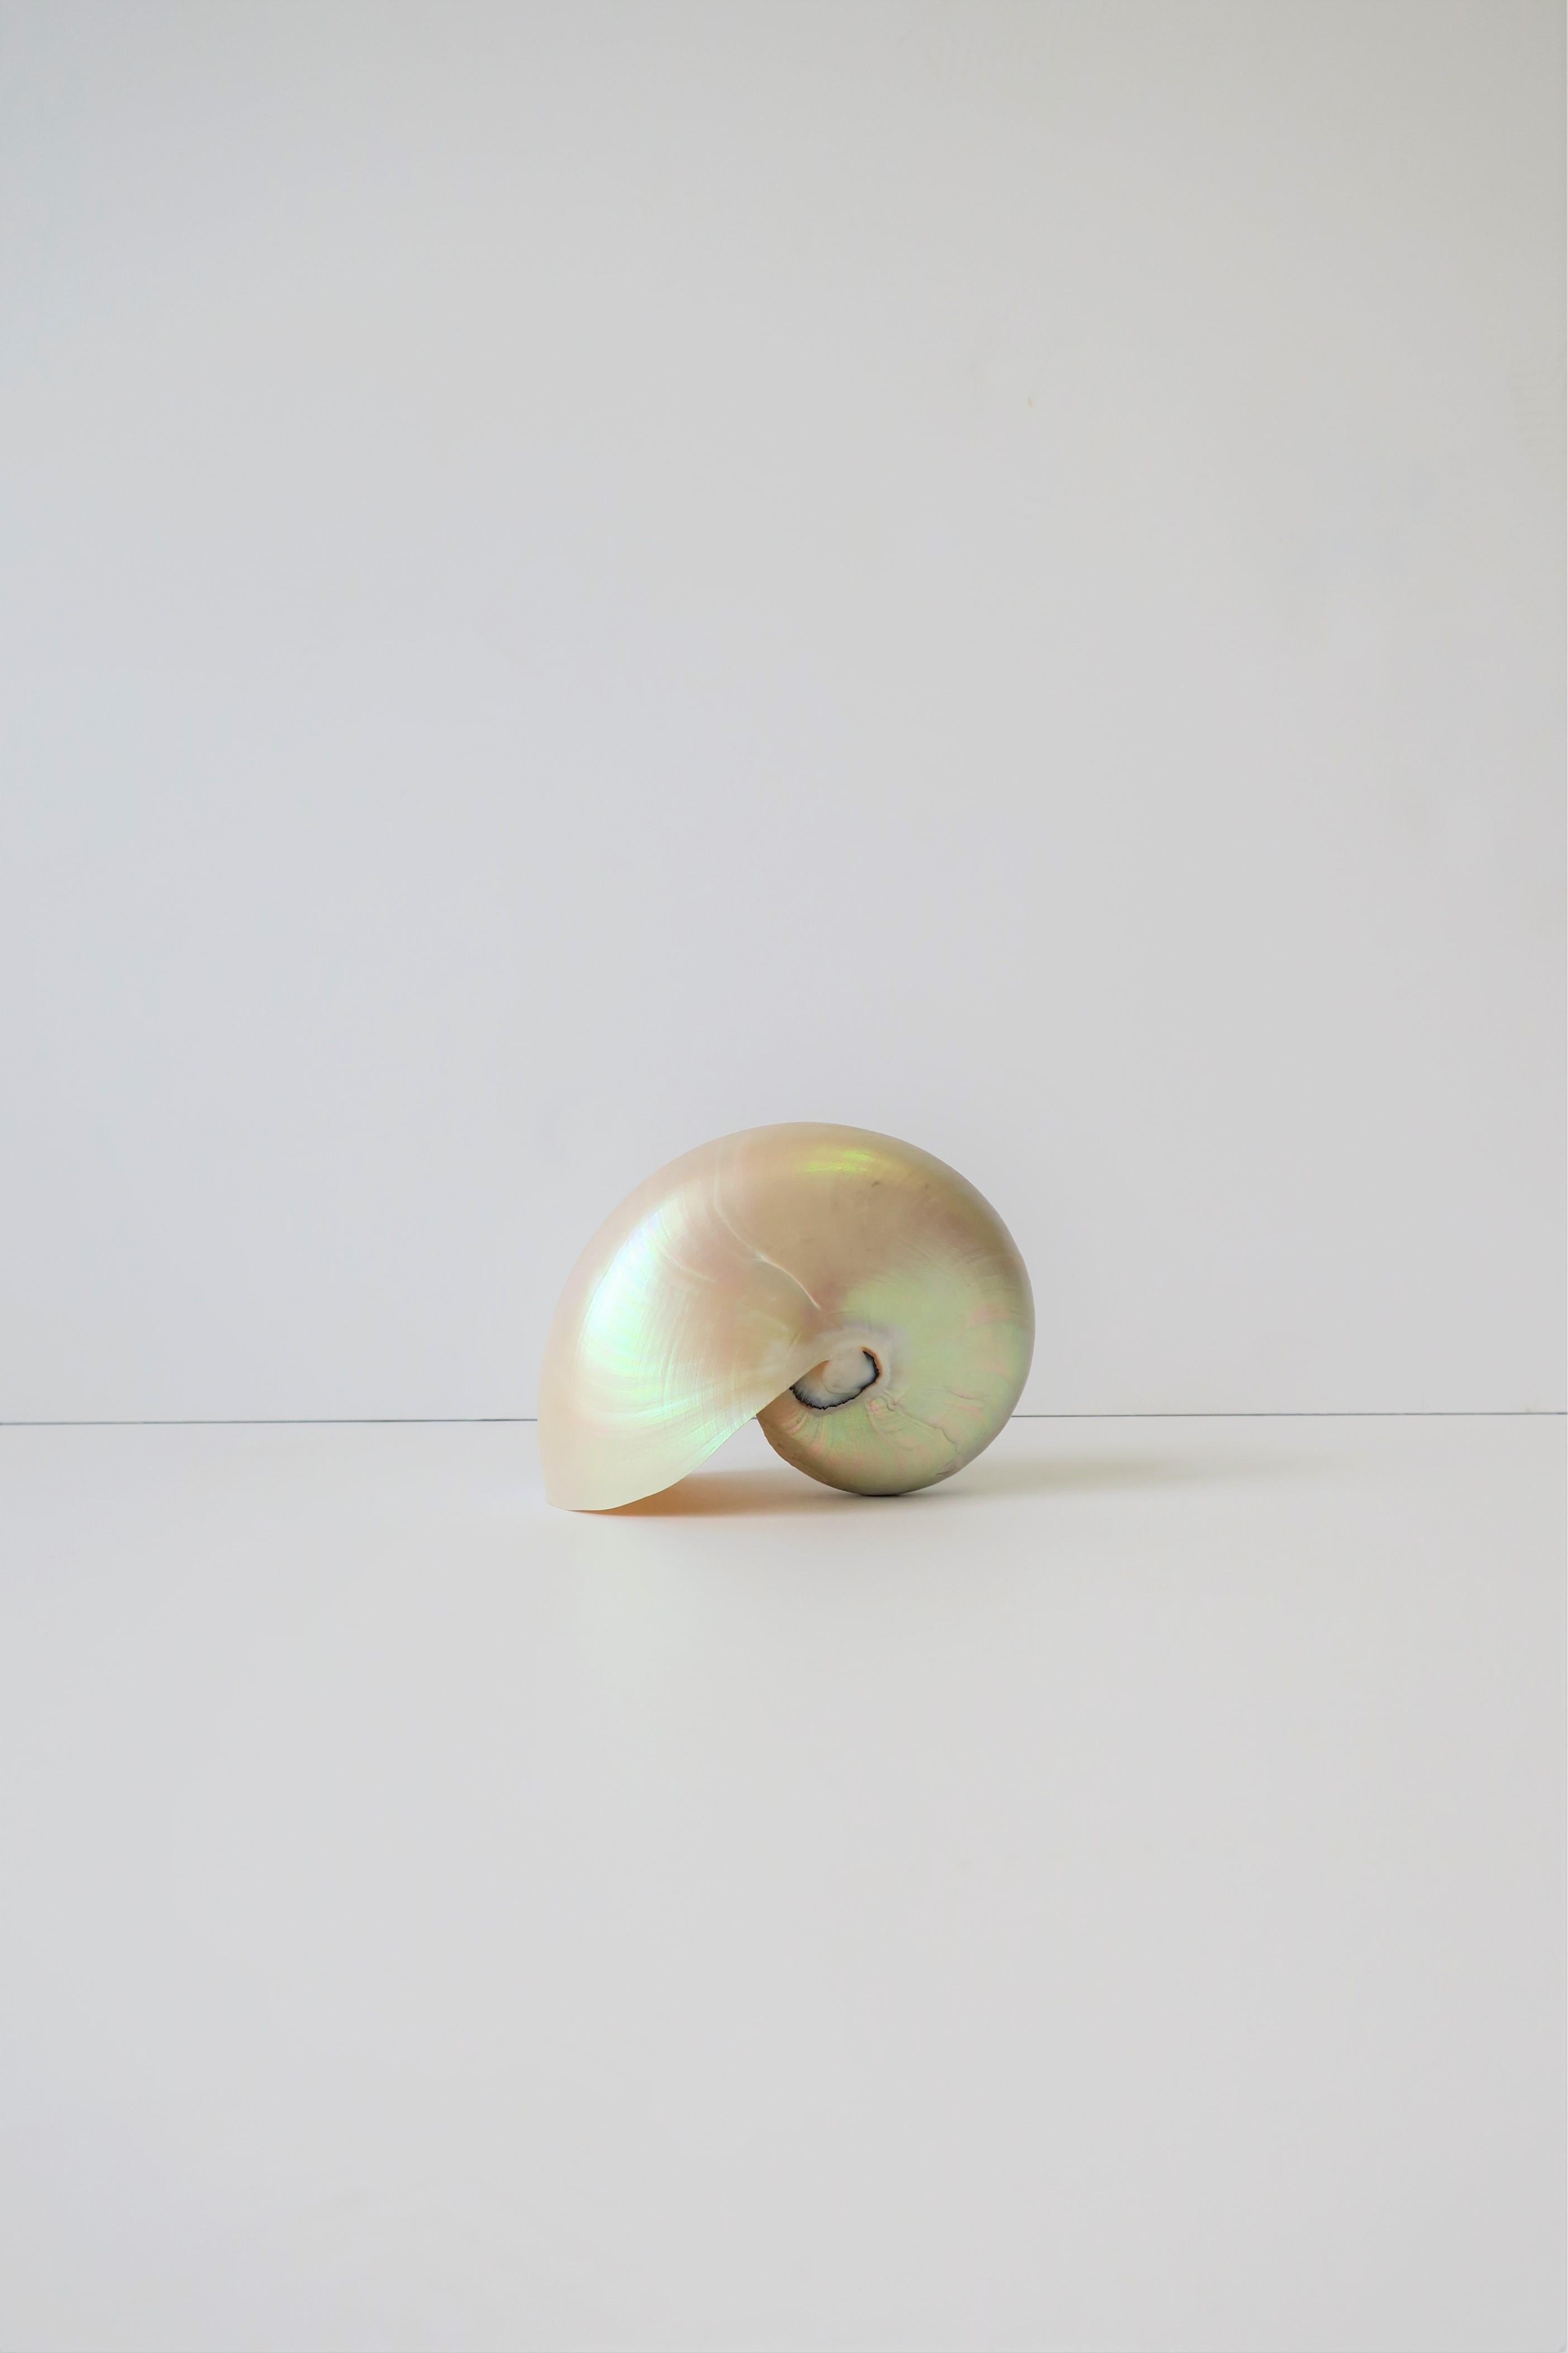 mother of pearl nautilus shell